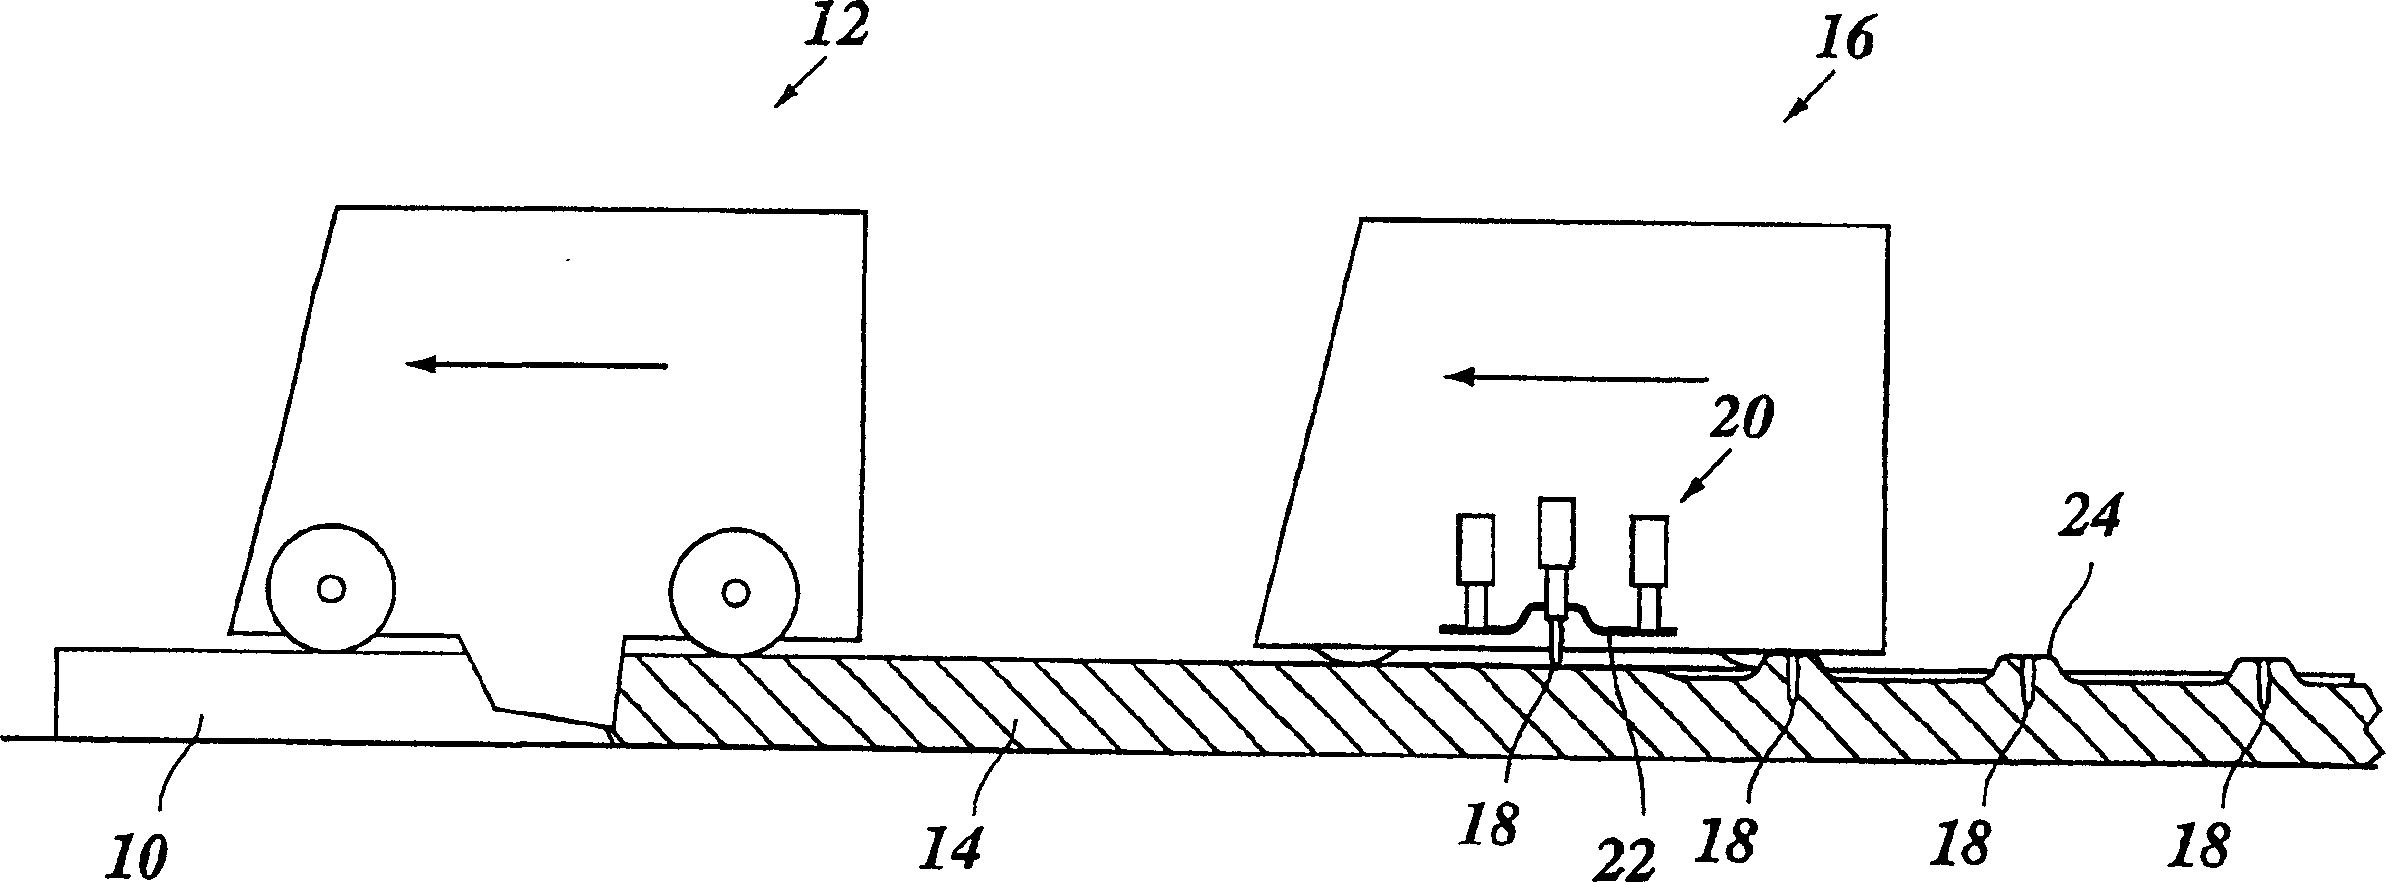 Method for producing rail infrastructure